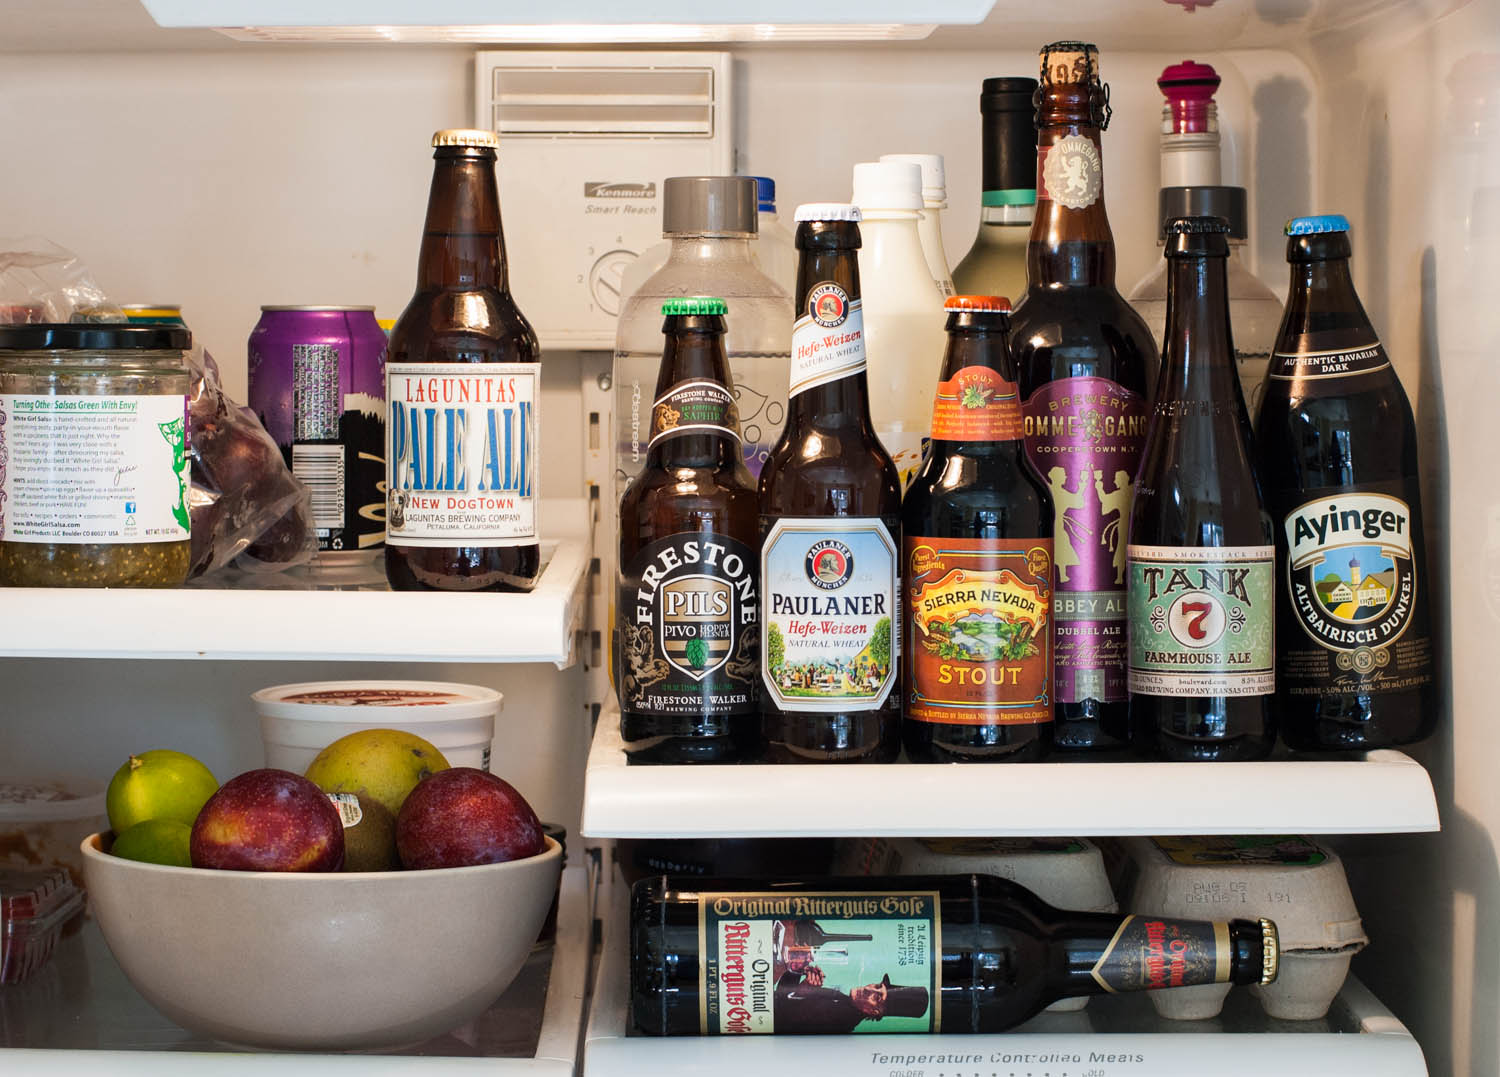 The 6 Beers You Should Always Have in Your Fridge for Killer Pairings